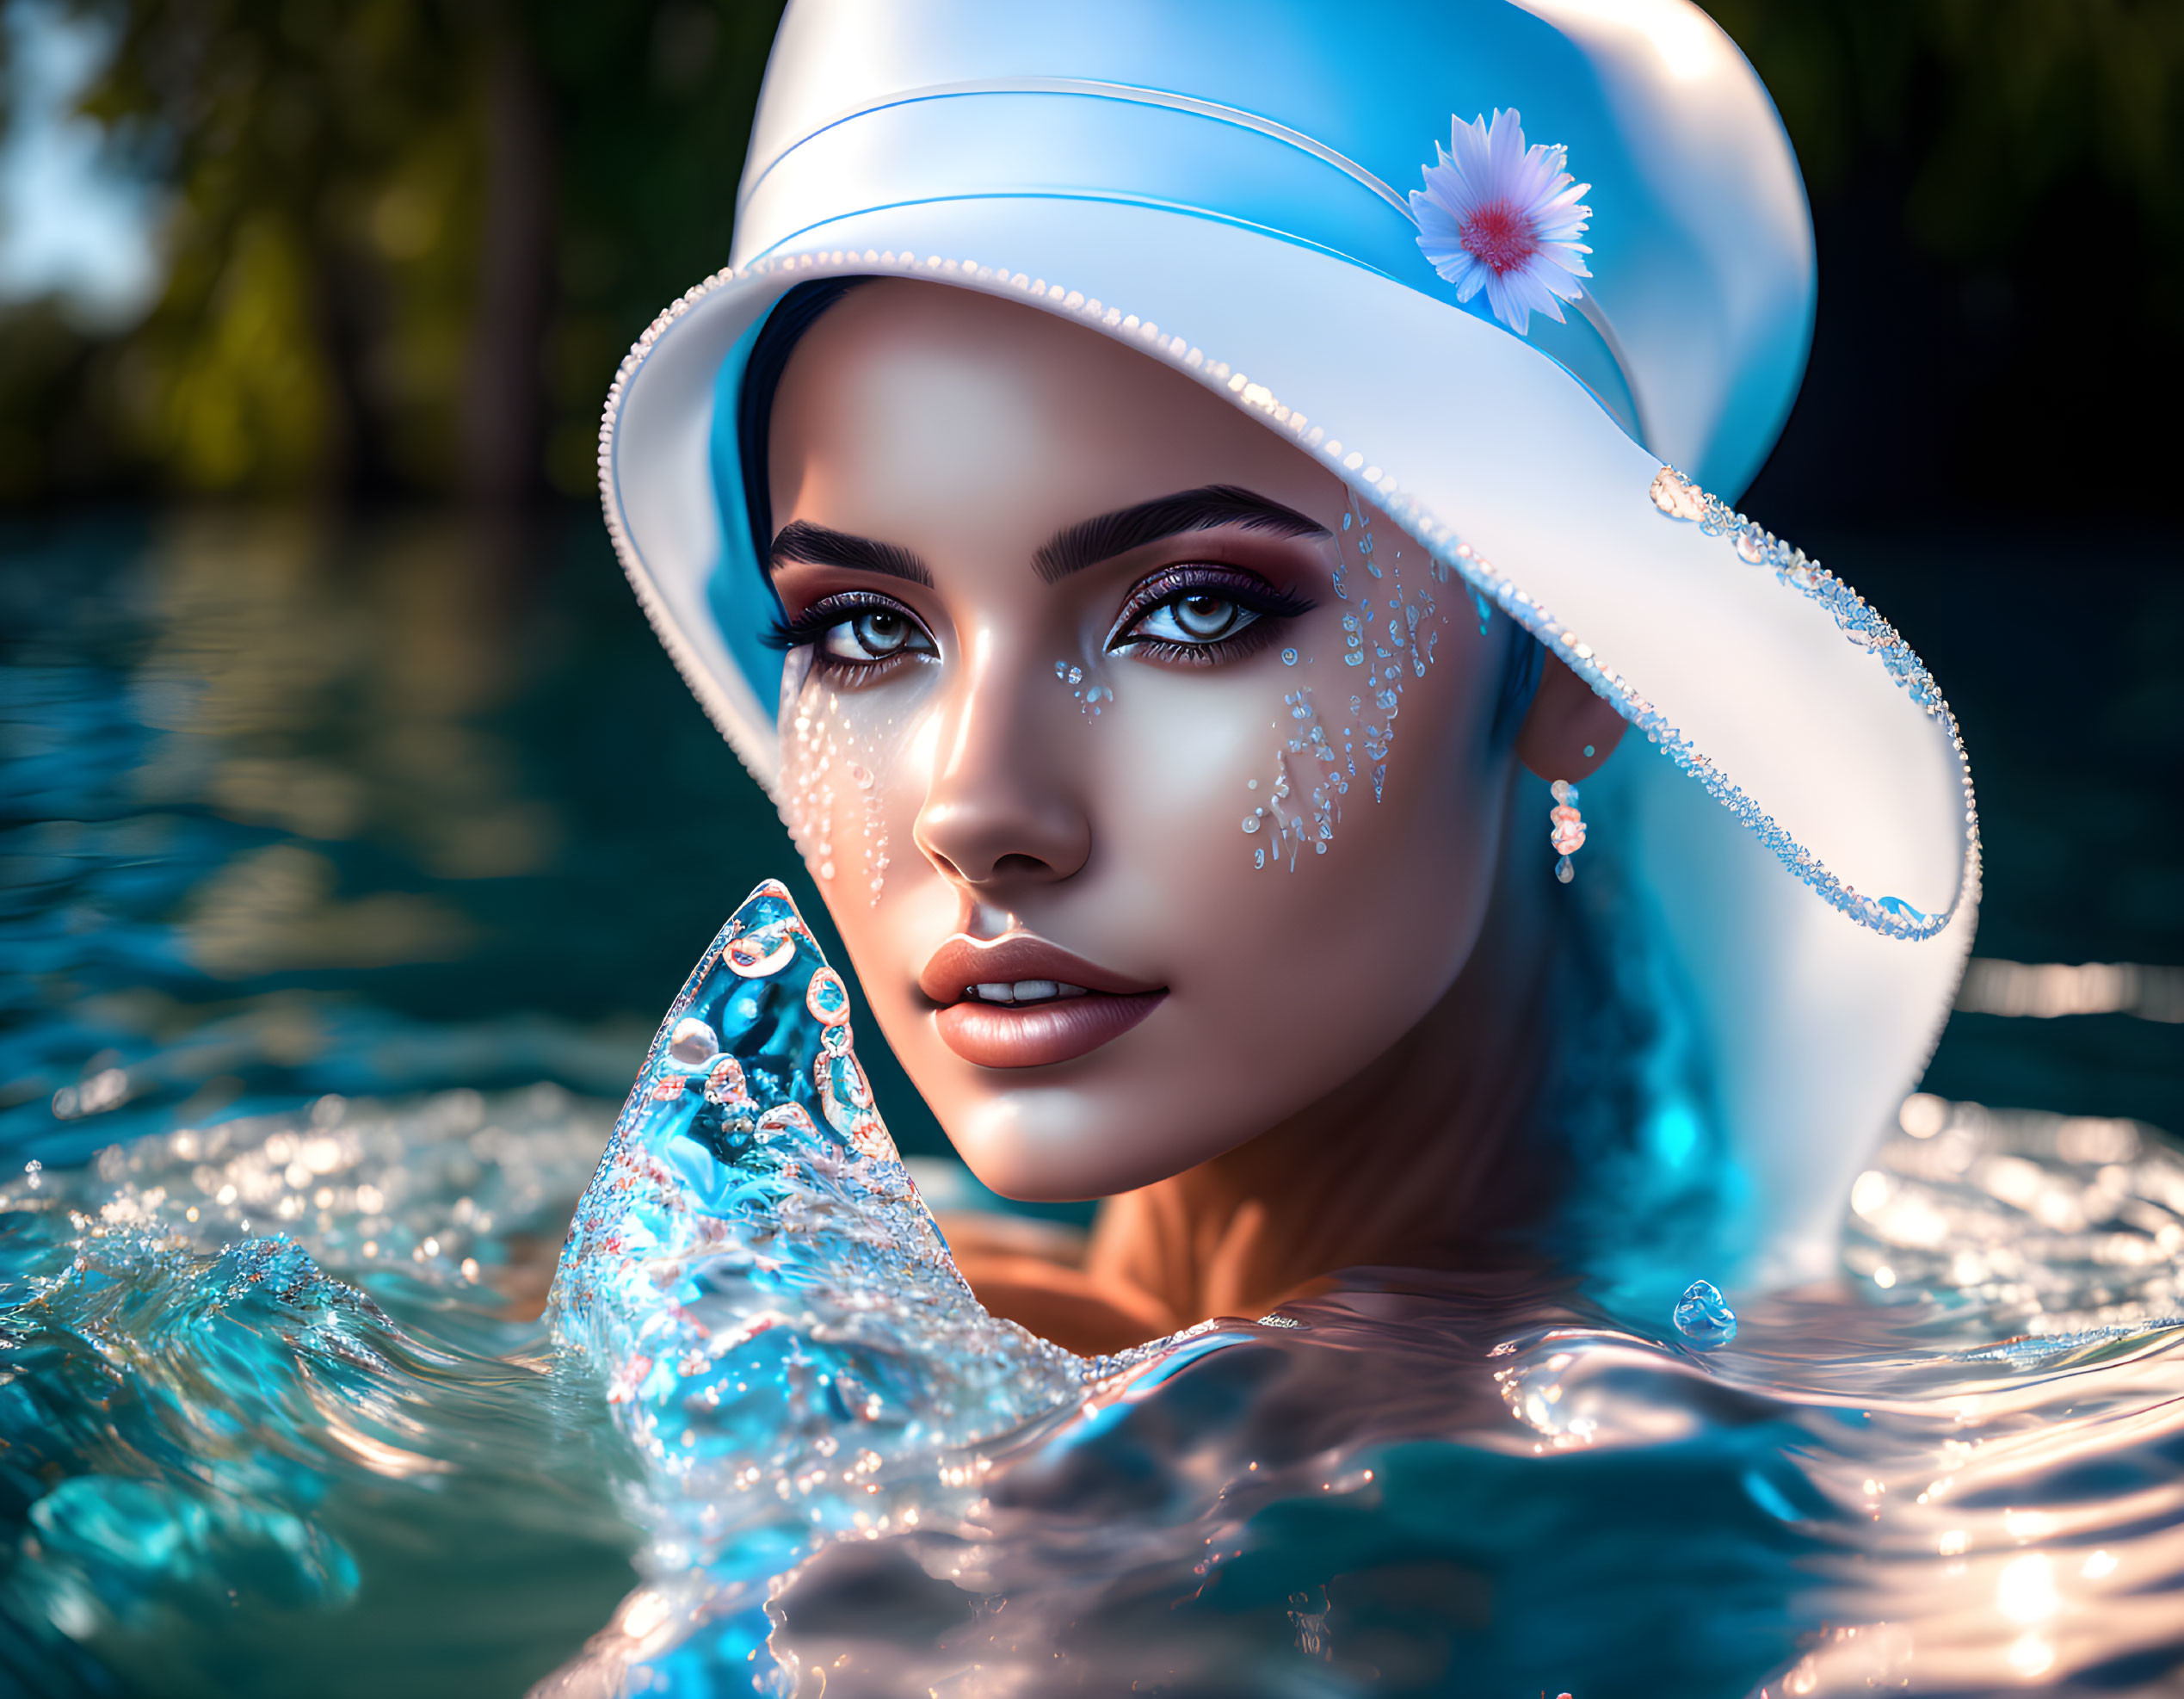 Digital Artwork: Woman with Elaborate Makeup and Jewelry in White Hat Submerged in Blue Water